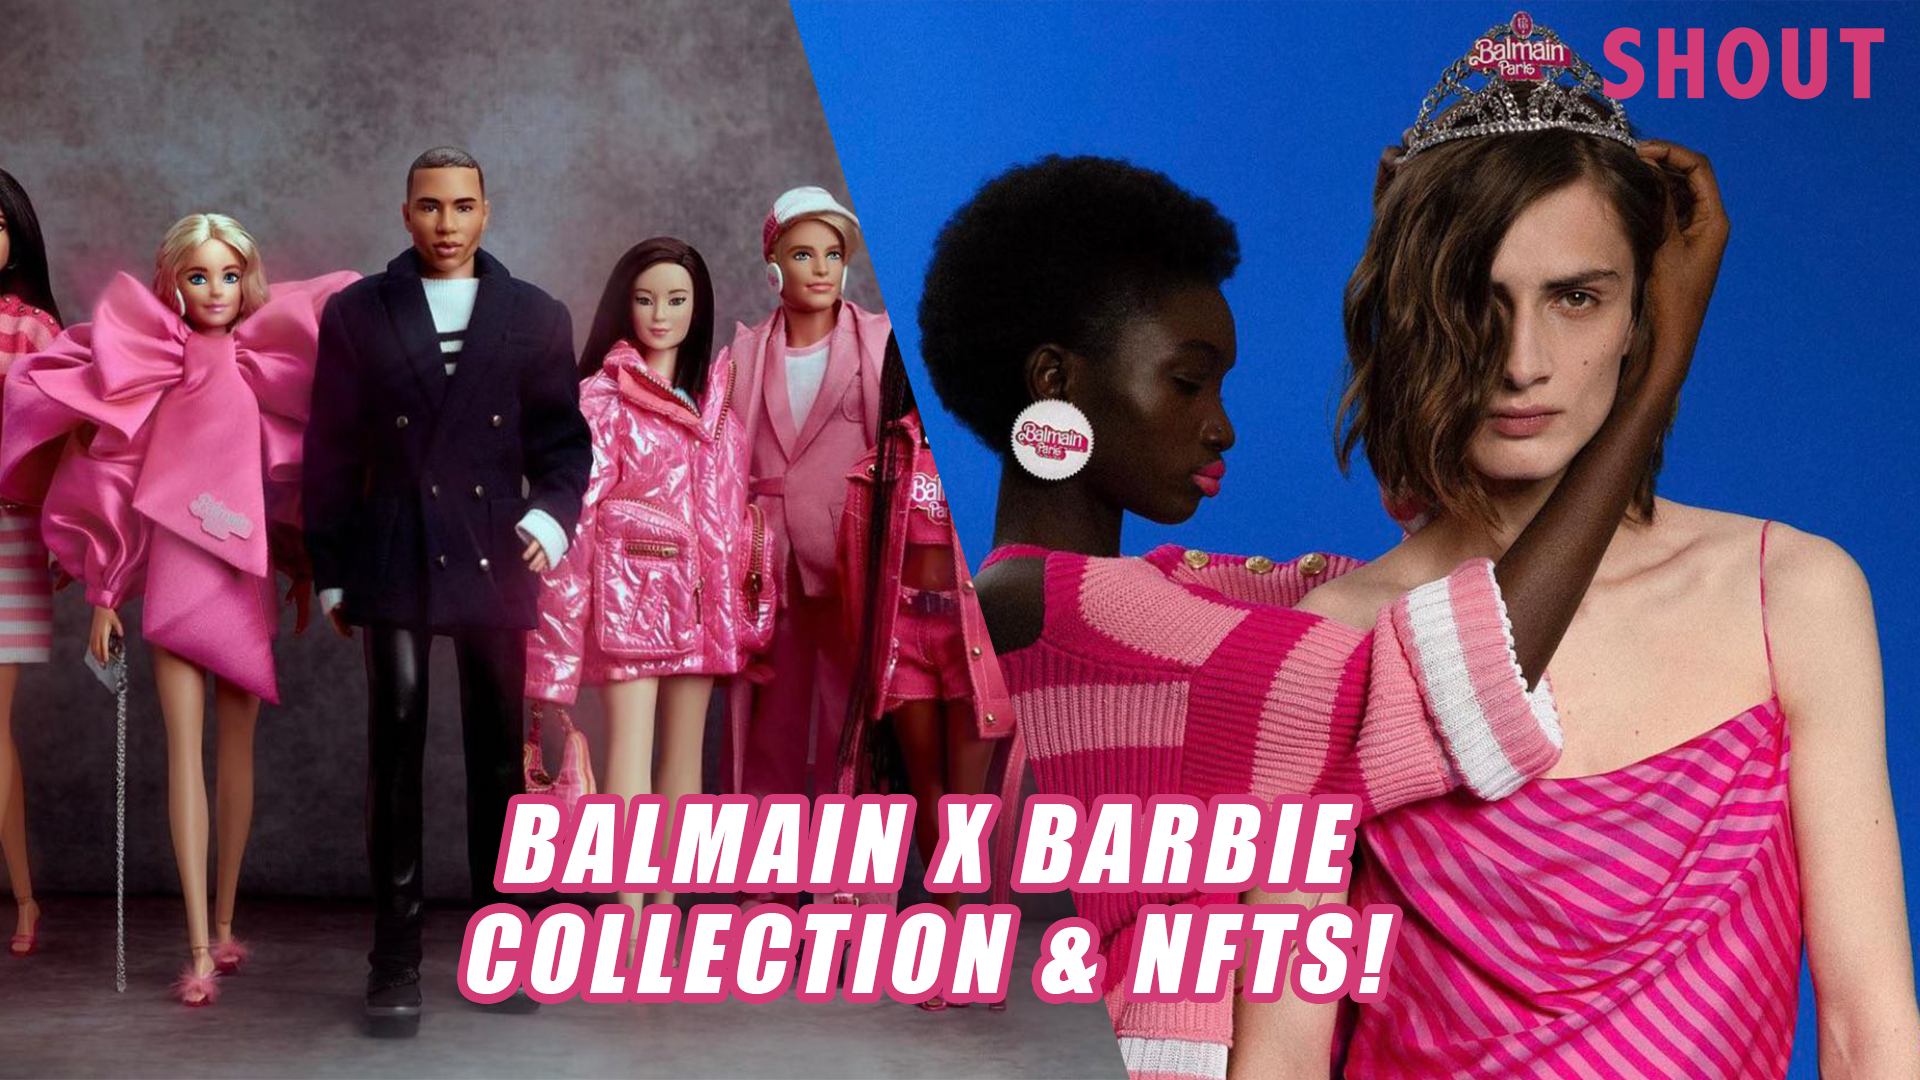 Balmain Links With Barbie for New Collection and NFT Series